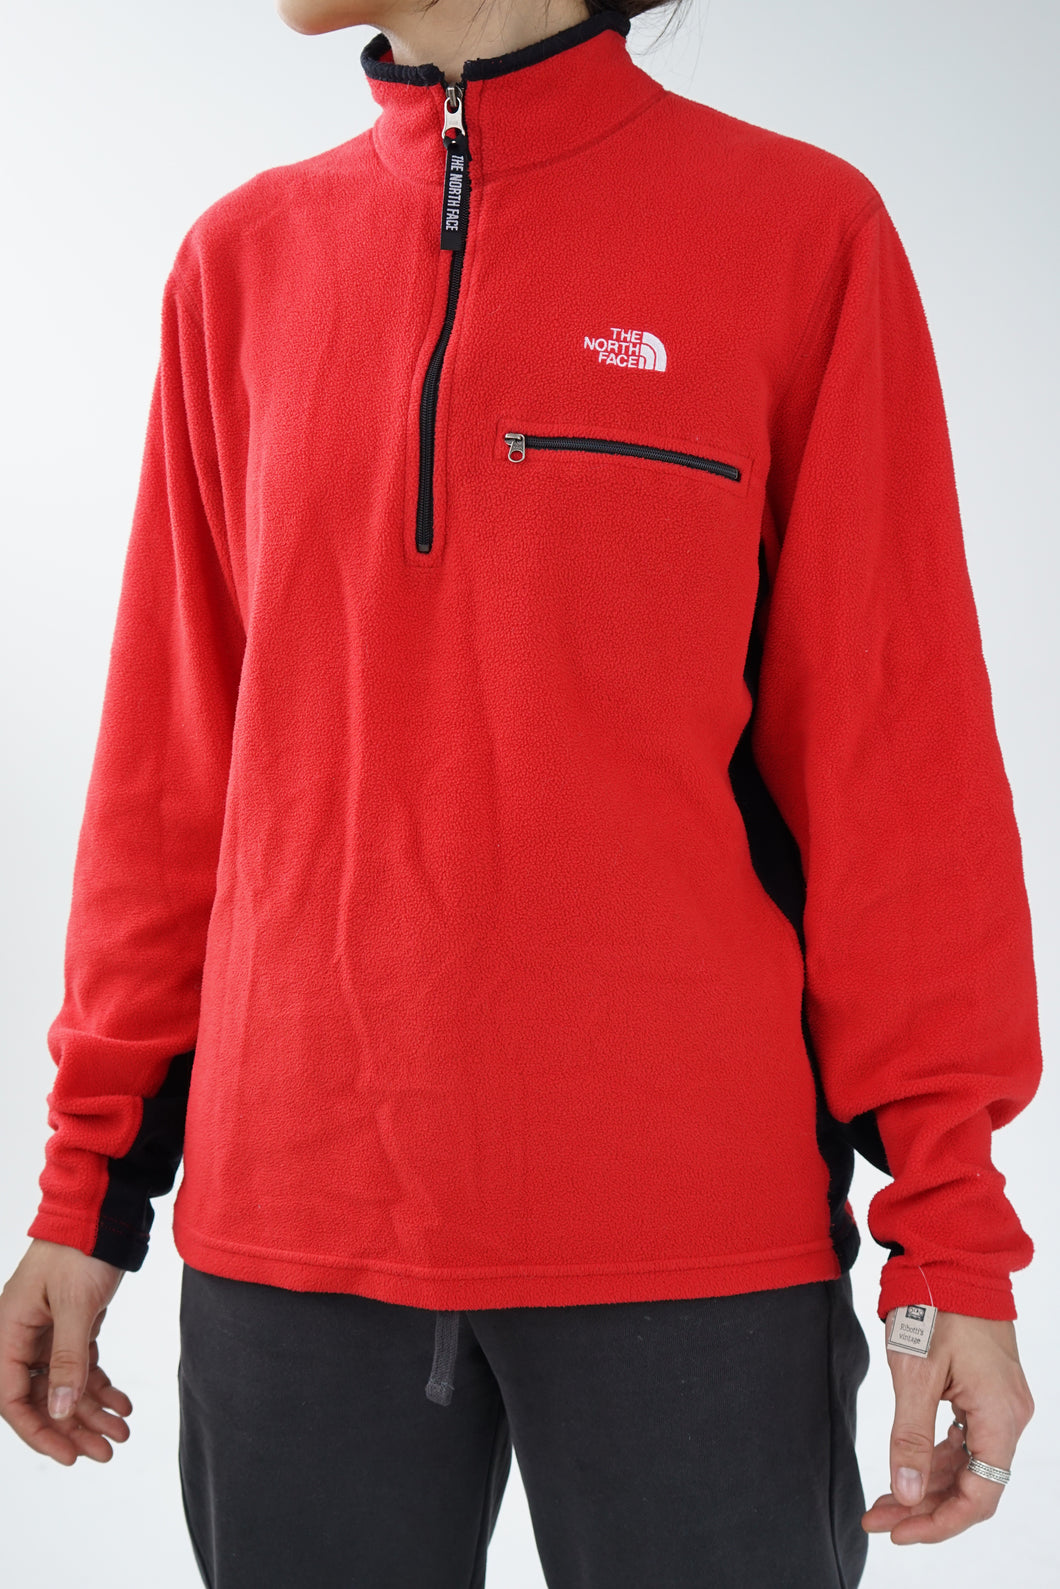 North Face close-fitting red fleece for men size M